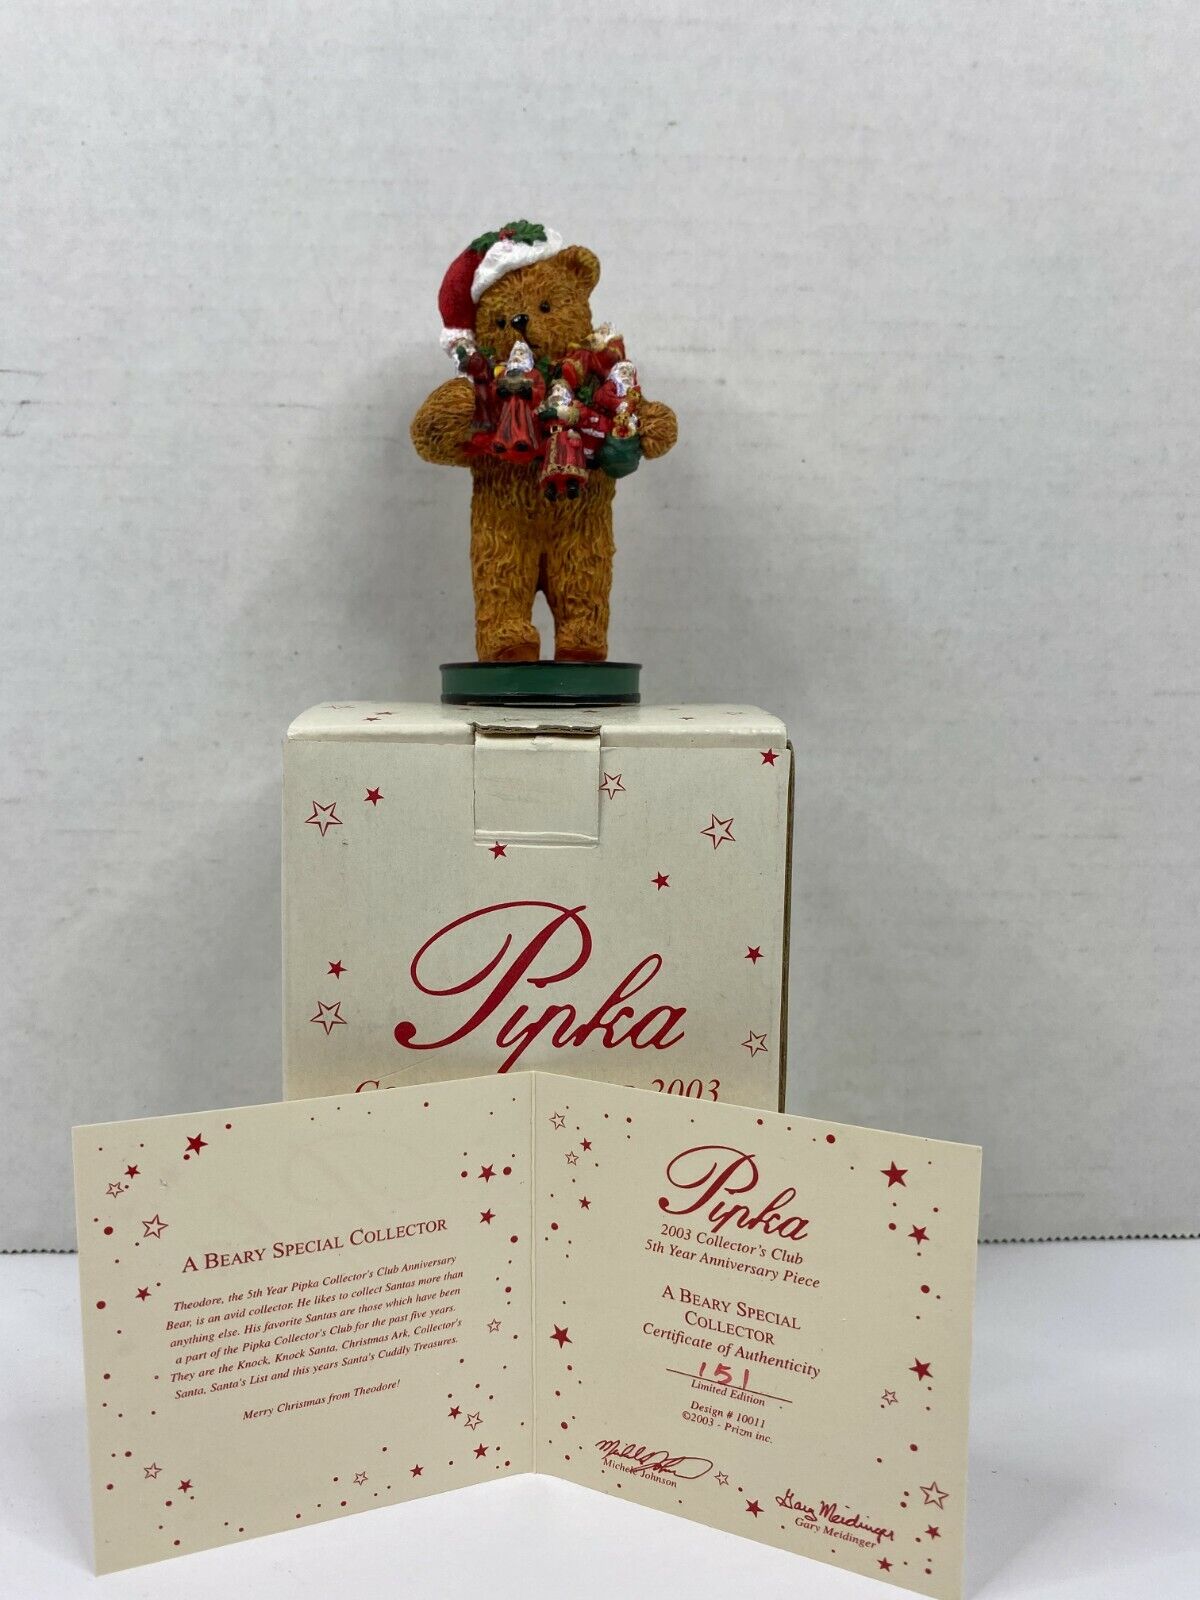 Vintage Pipka, A Beary Special Collector, #10011, 2003, New, Open Box Christmas